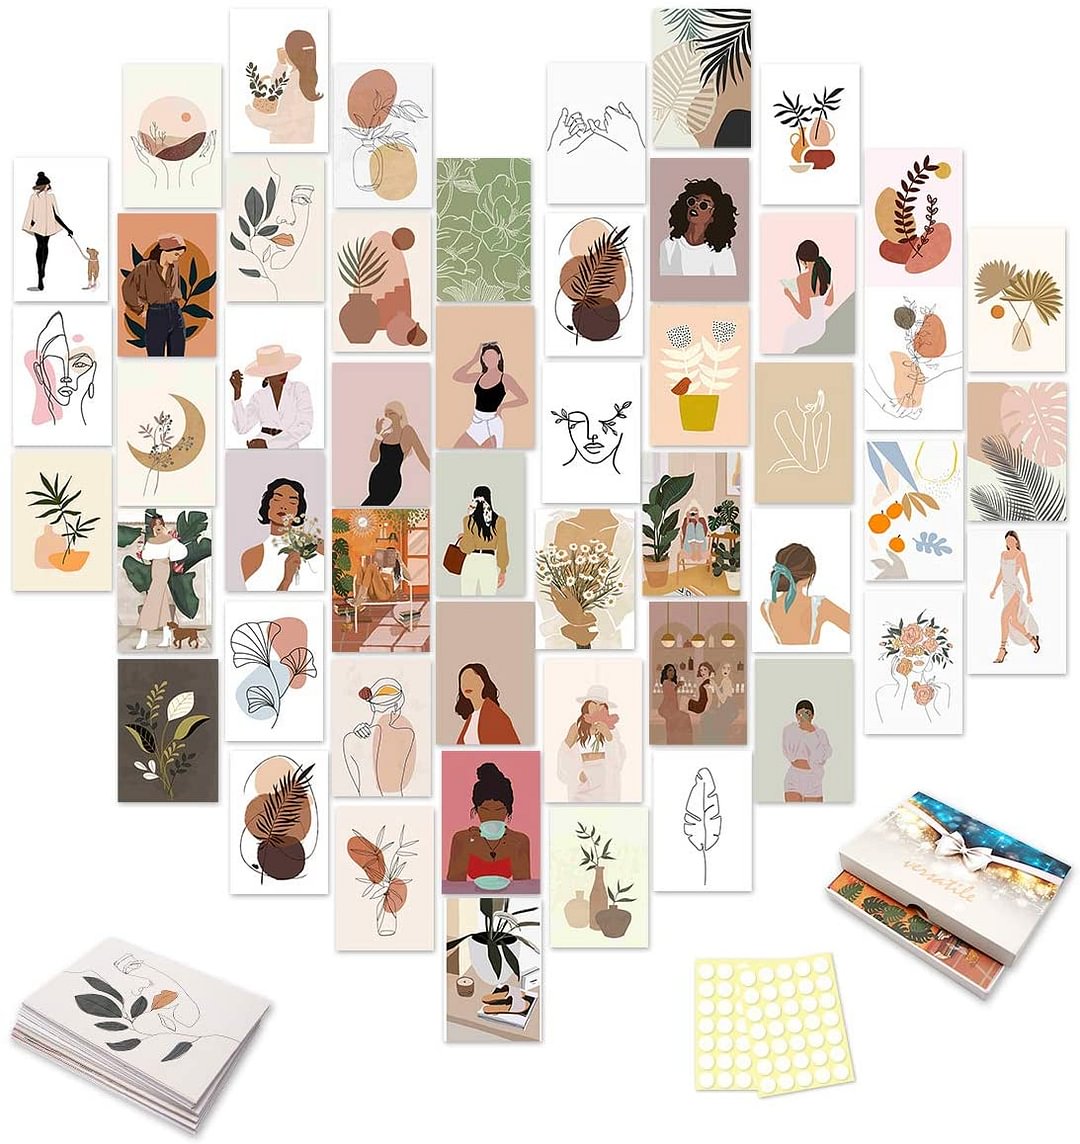 Beige Ins Style Aesthetic Wall Collage Kit, Posters For Room Aesthetic, Girls Bedroom Decor, Pretty Beige Ins Style Wall Art Print, Wall Decor For Bedroom Aesthetic 50 Set、、sdecorshop